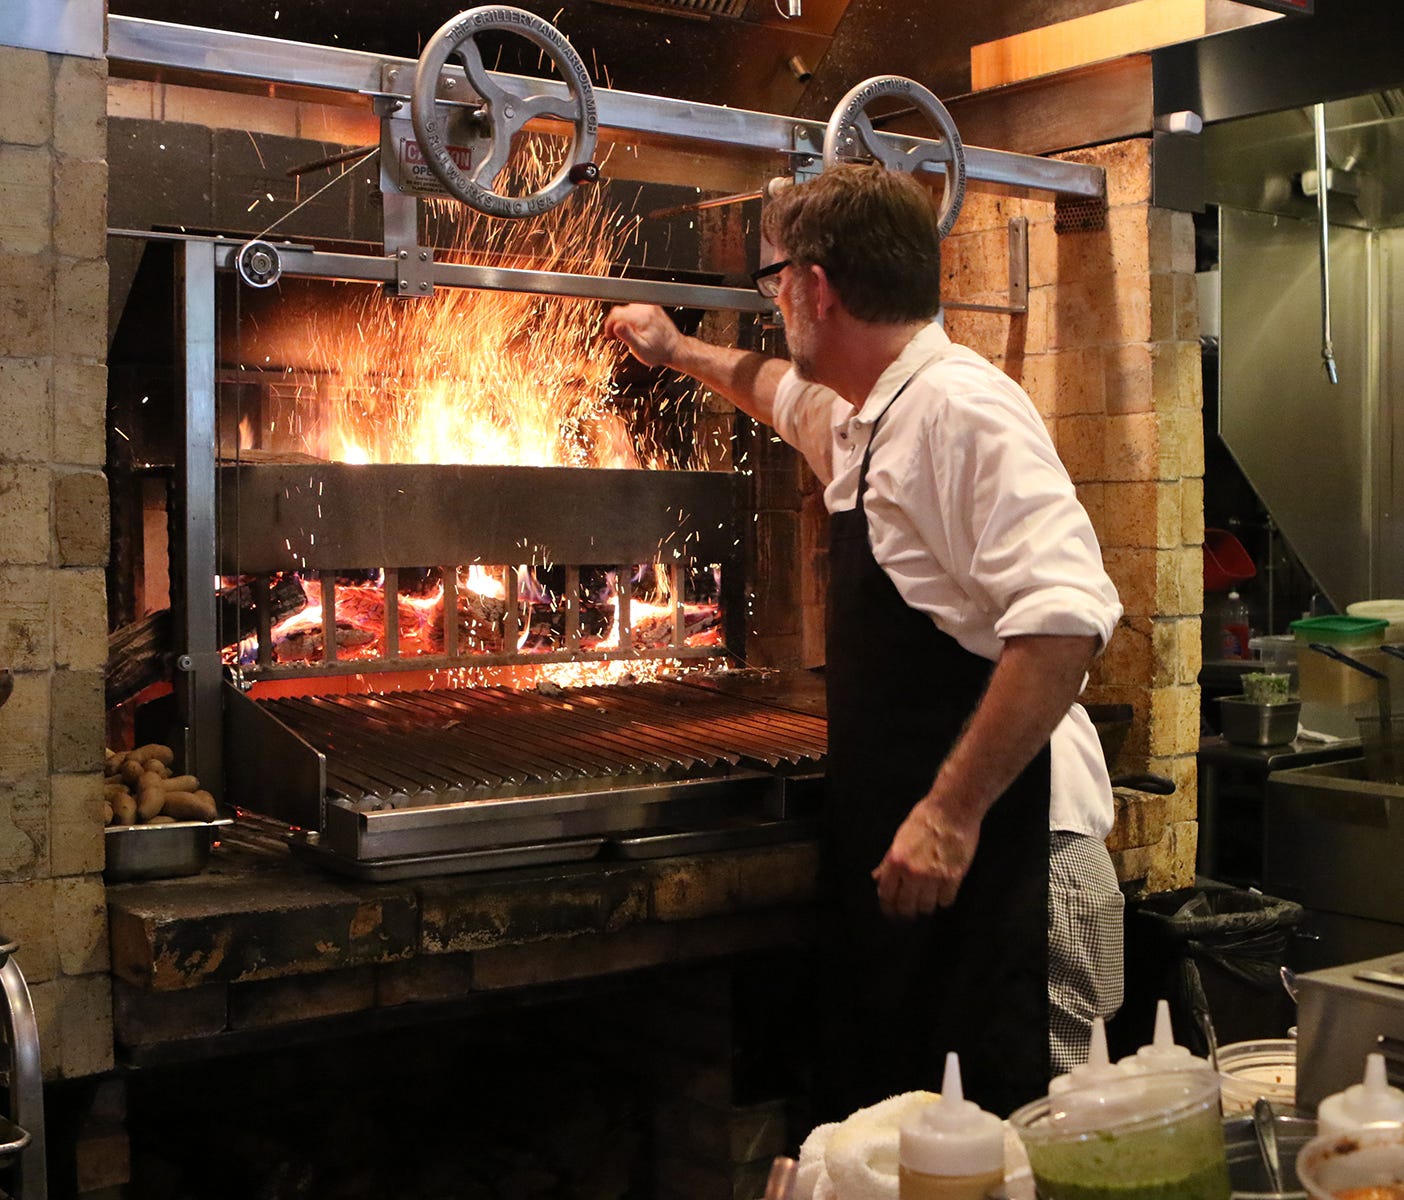 Executive chef Mark Jensen works the oven at Lexington, Ky.'s Middle Fork Kitchen Bar to create seasonal dishes from locally sourced ingredients like lamb sausages that are house-ground from 100% local lamb and served with fennel salad and house-made